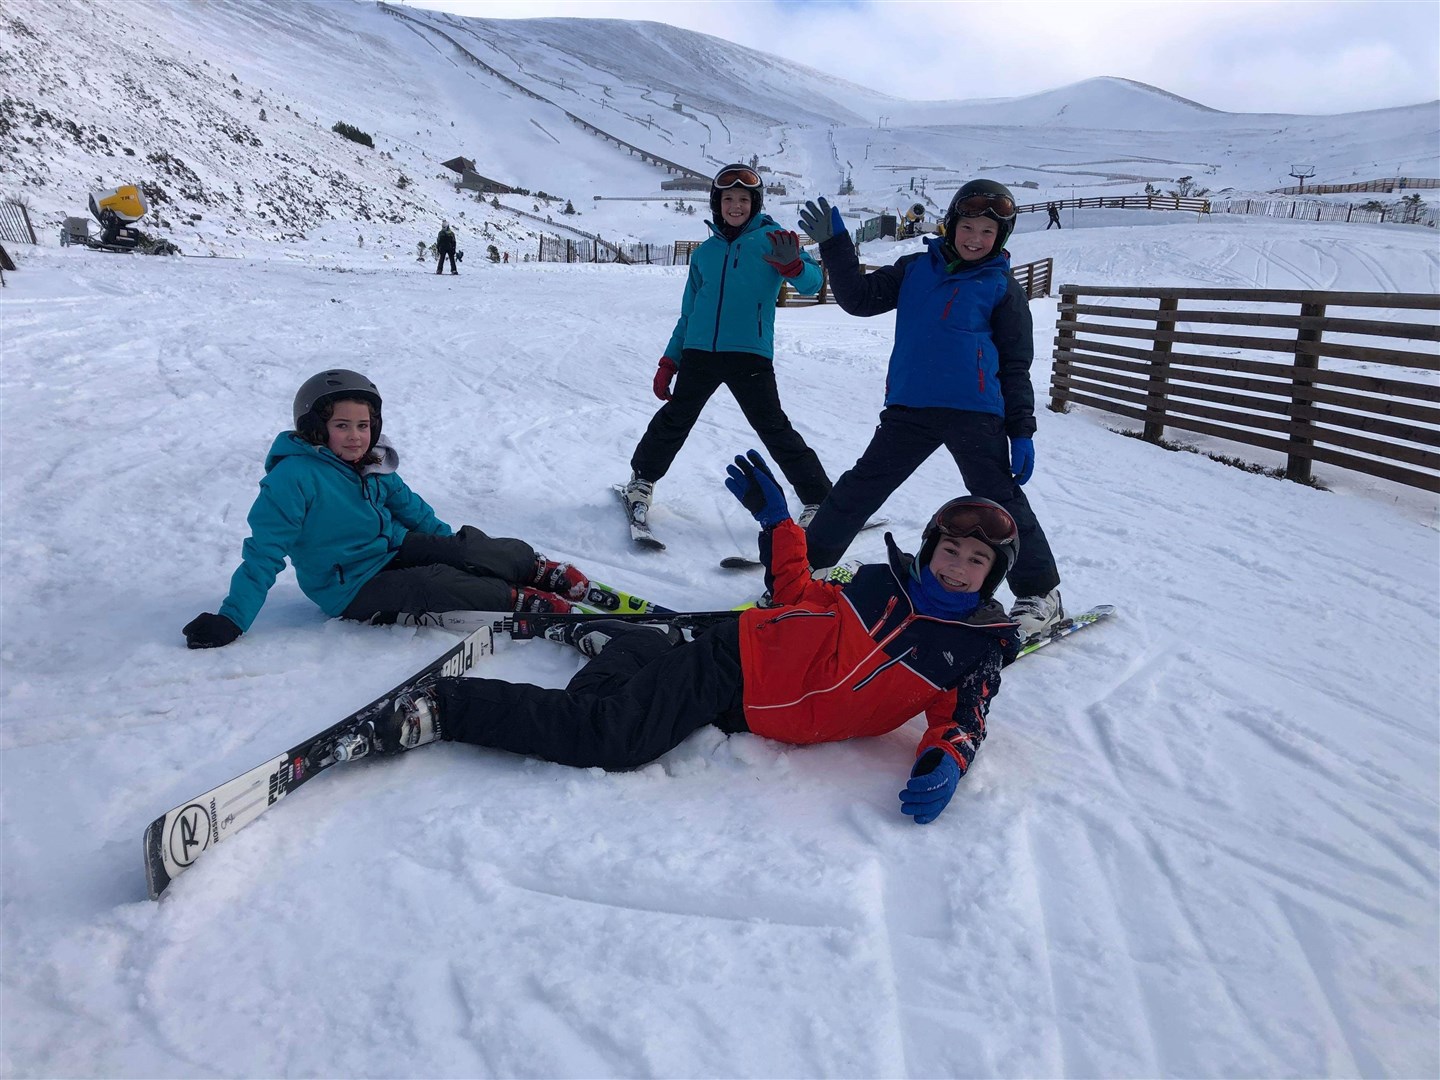 Youngsters take a break from their ski lessons with Aviemore-based Free Ski last week during half-term. The further arrival of snow since then has led to the best conditions of this ski season so far.